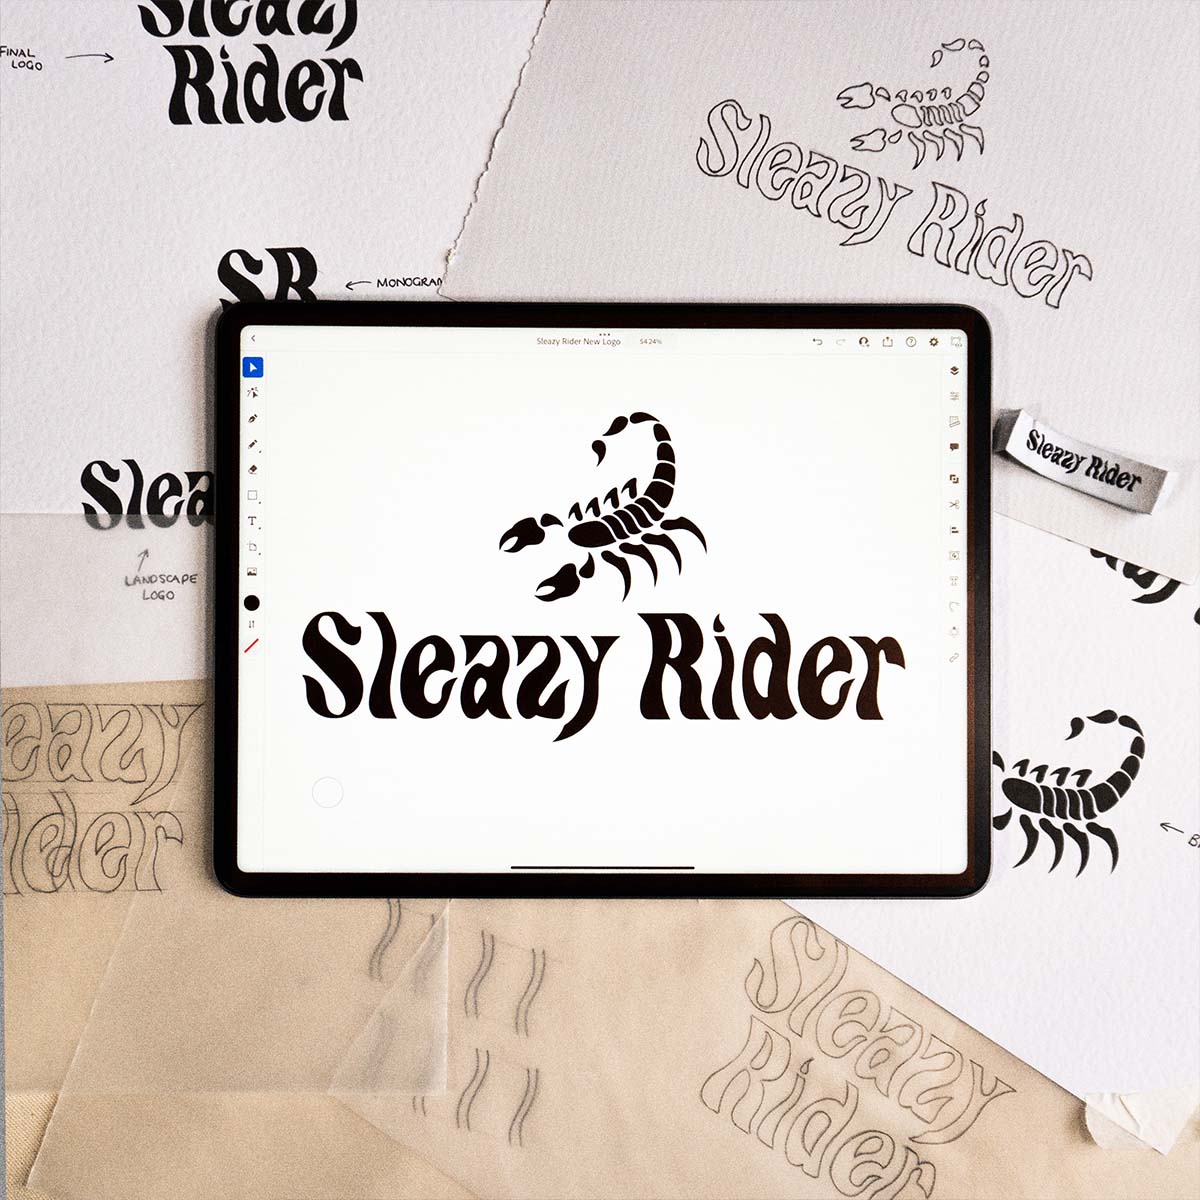 Behind The Brand: What’s New At Sleazy Rider?